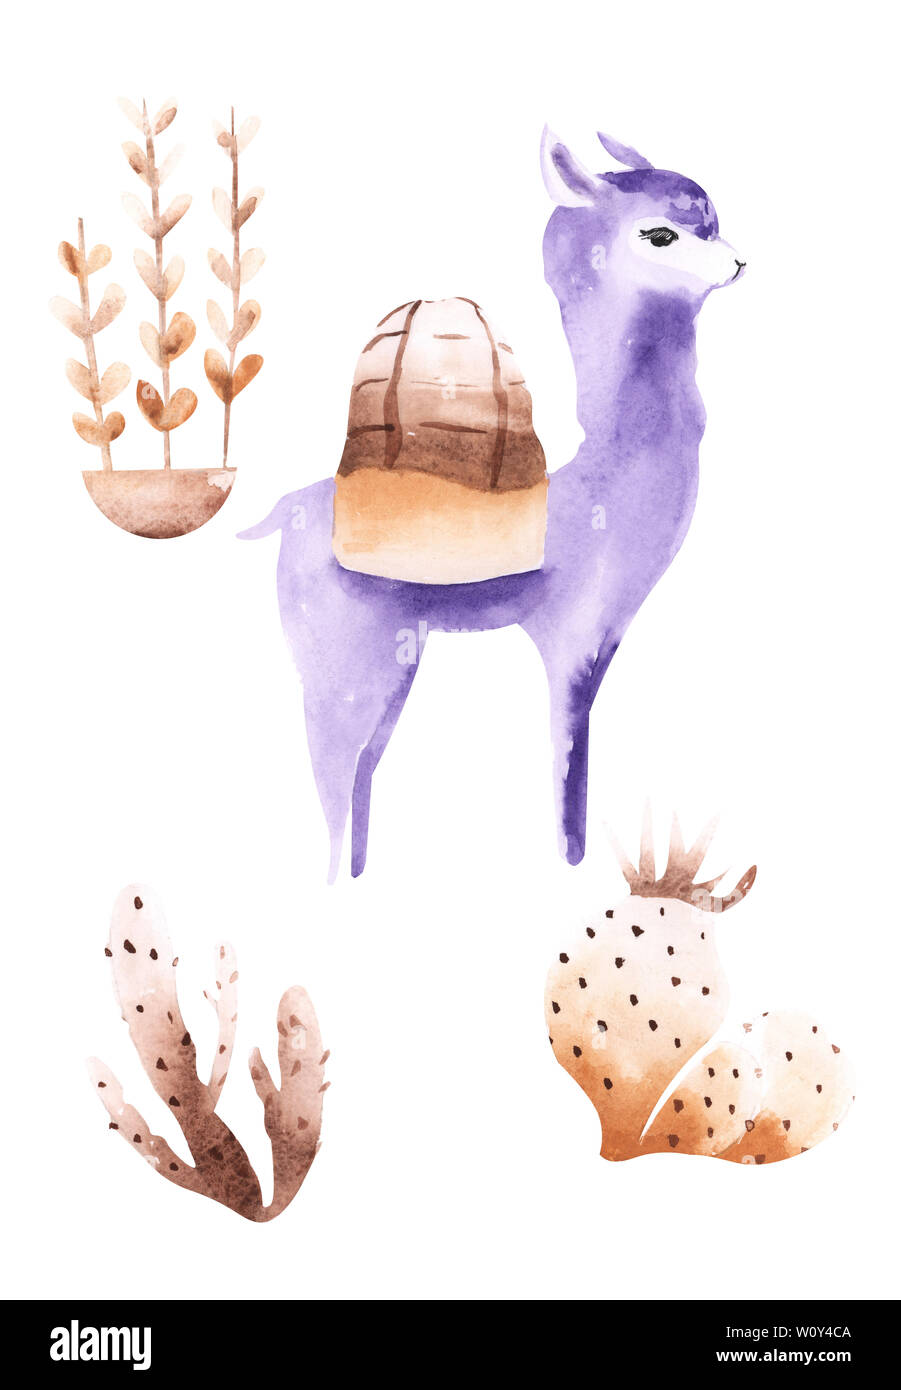 Illustration of drawing colored watercolor animal alpaca among flowers and plants on an isolated background. Stock Photo